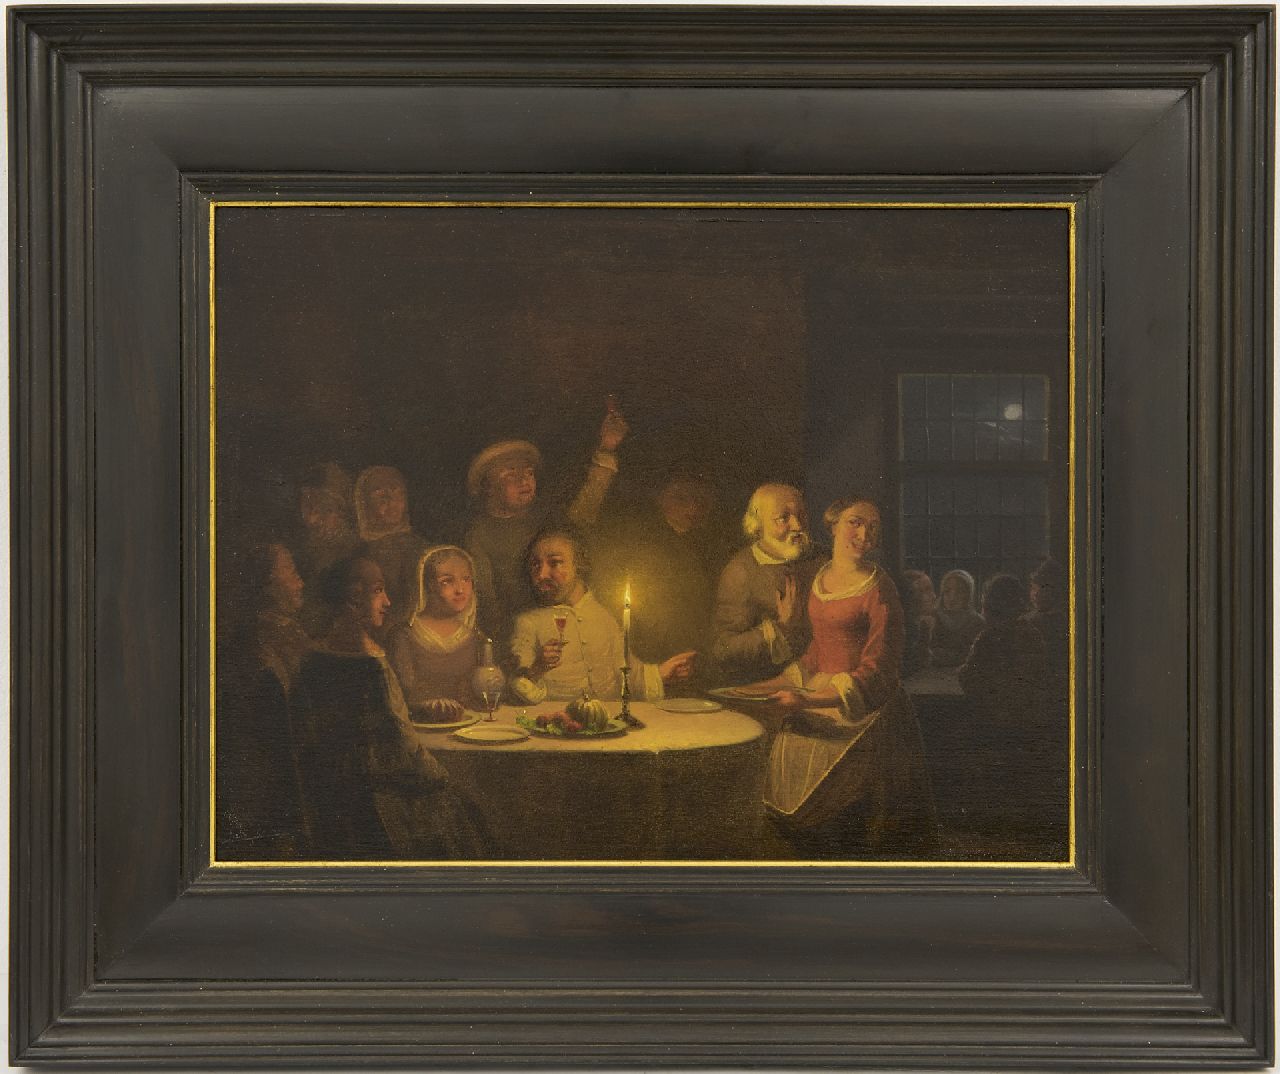 Sjamaar P.G.  | Pieter Gerardus Sjamaar | Paintings offered for sale | A merry company by candlelight, oil on panel 21.9 x 28.4 cm, signed l.r.